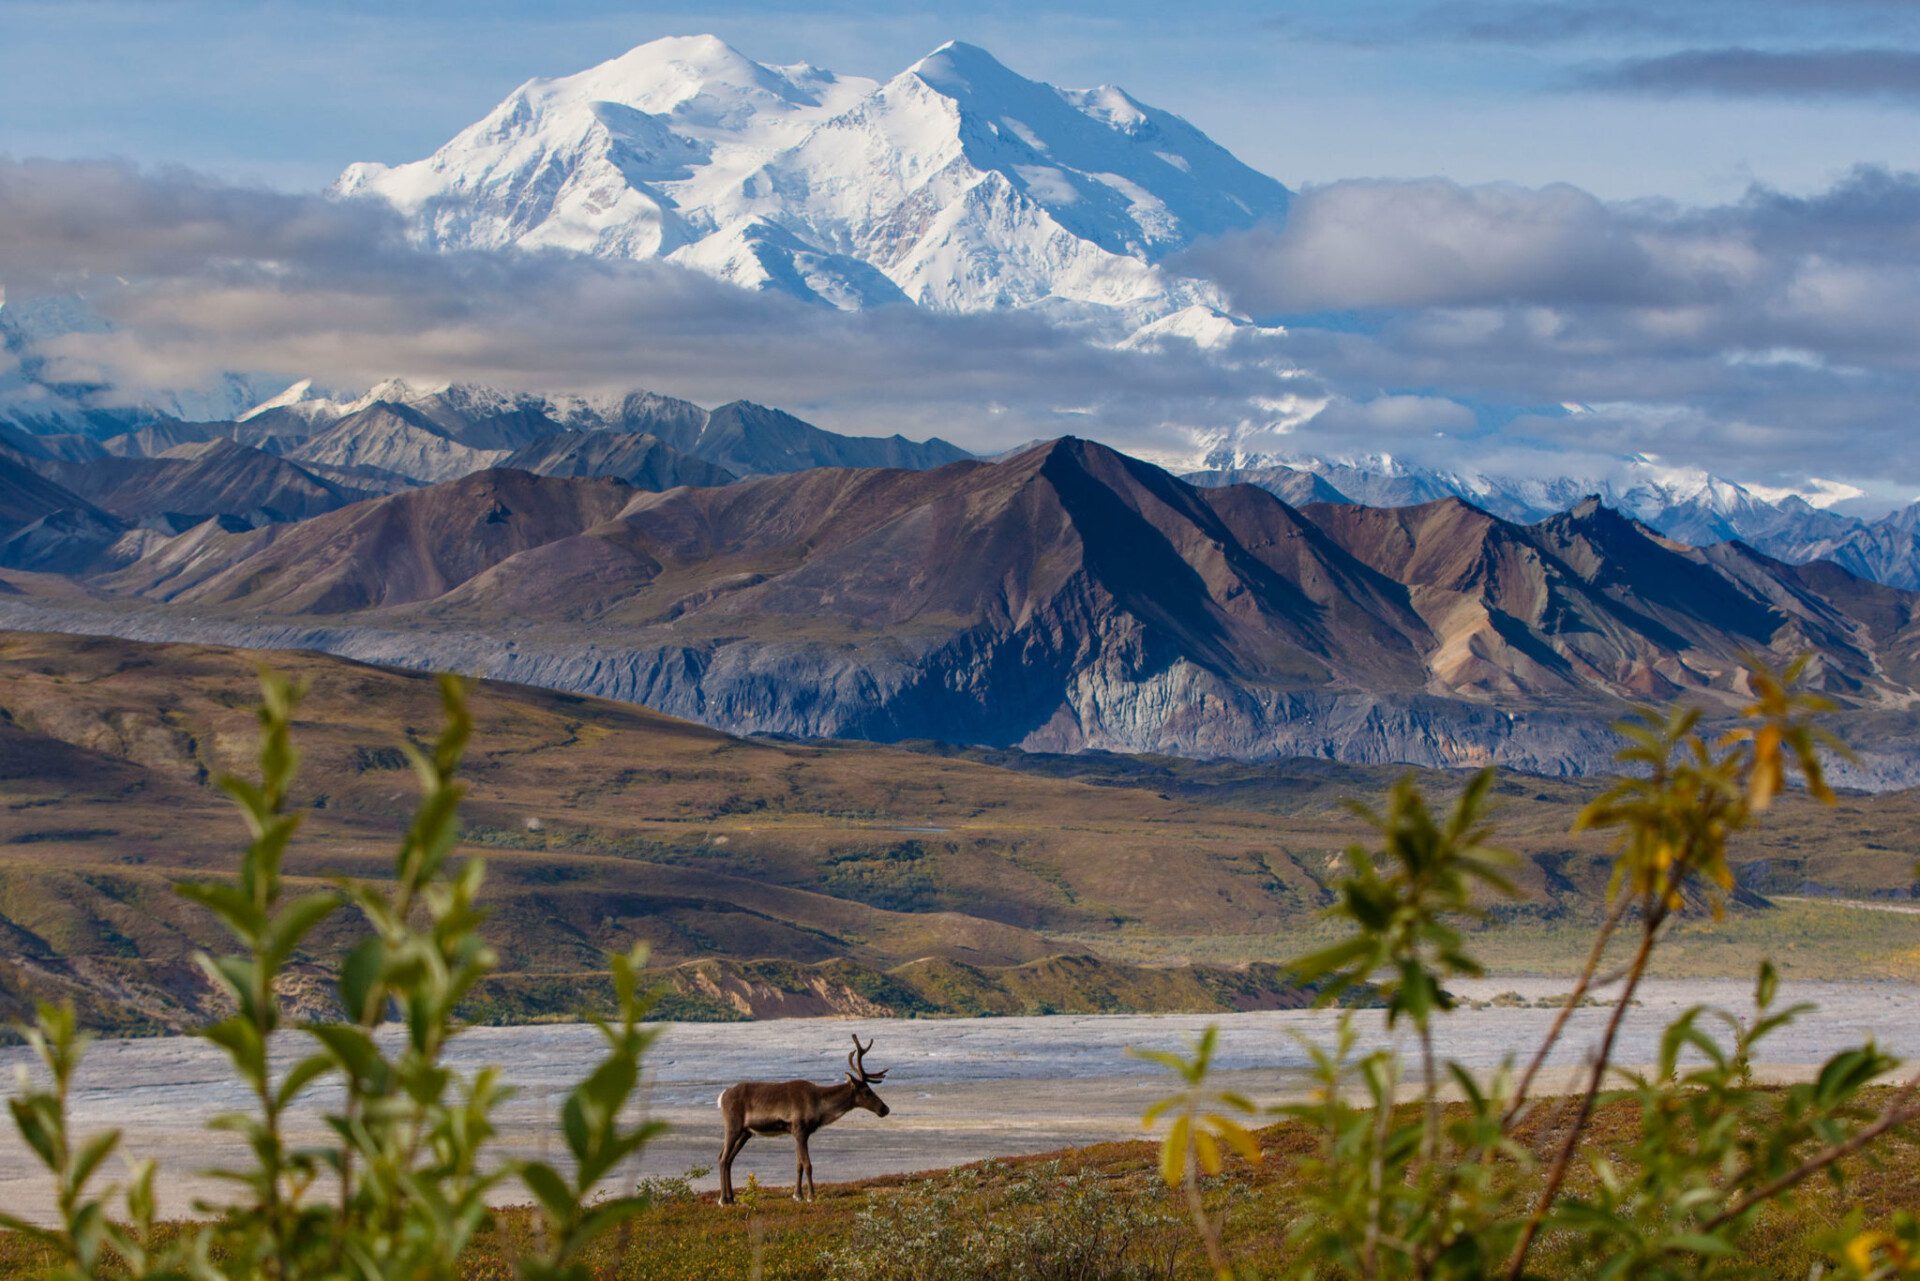 tour packages to alaska